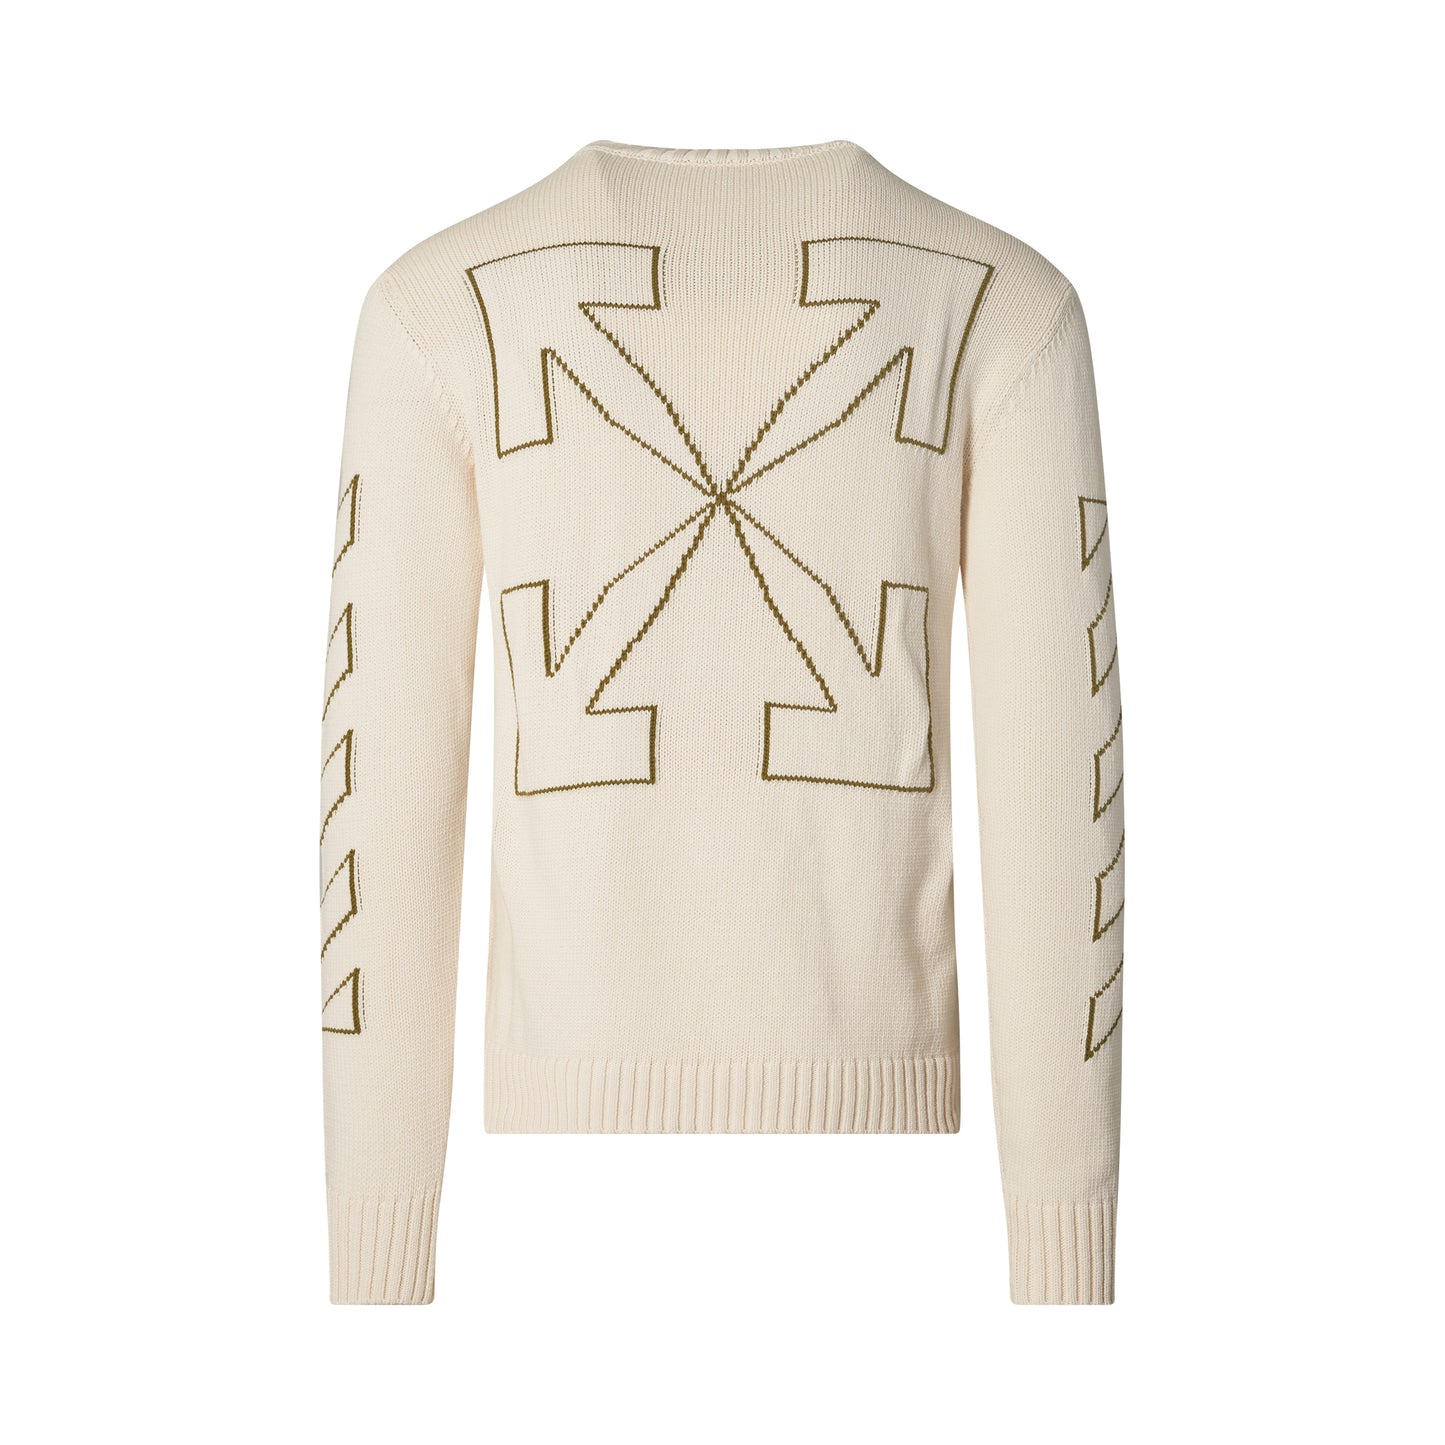 Arrow Diagonal Outline Knit Sweater in Tofu